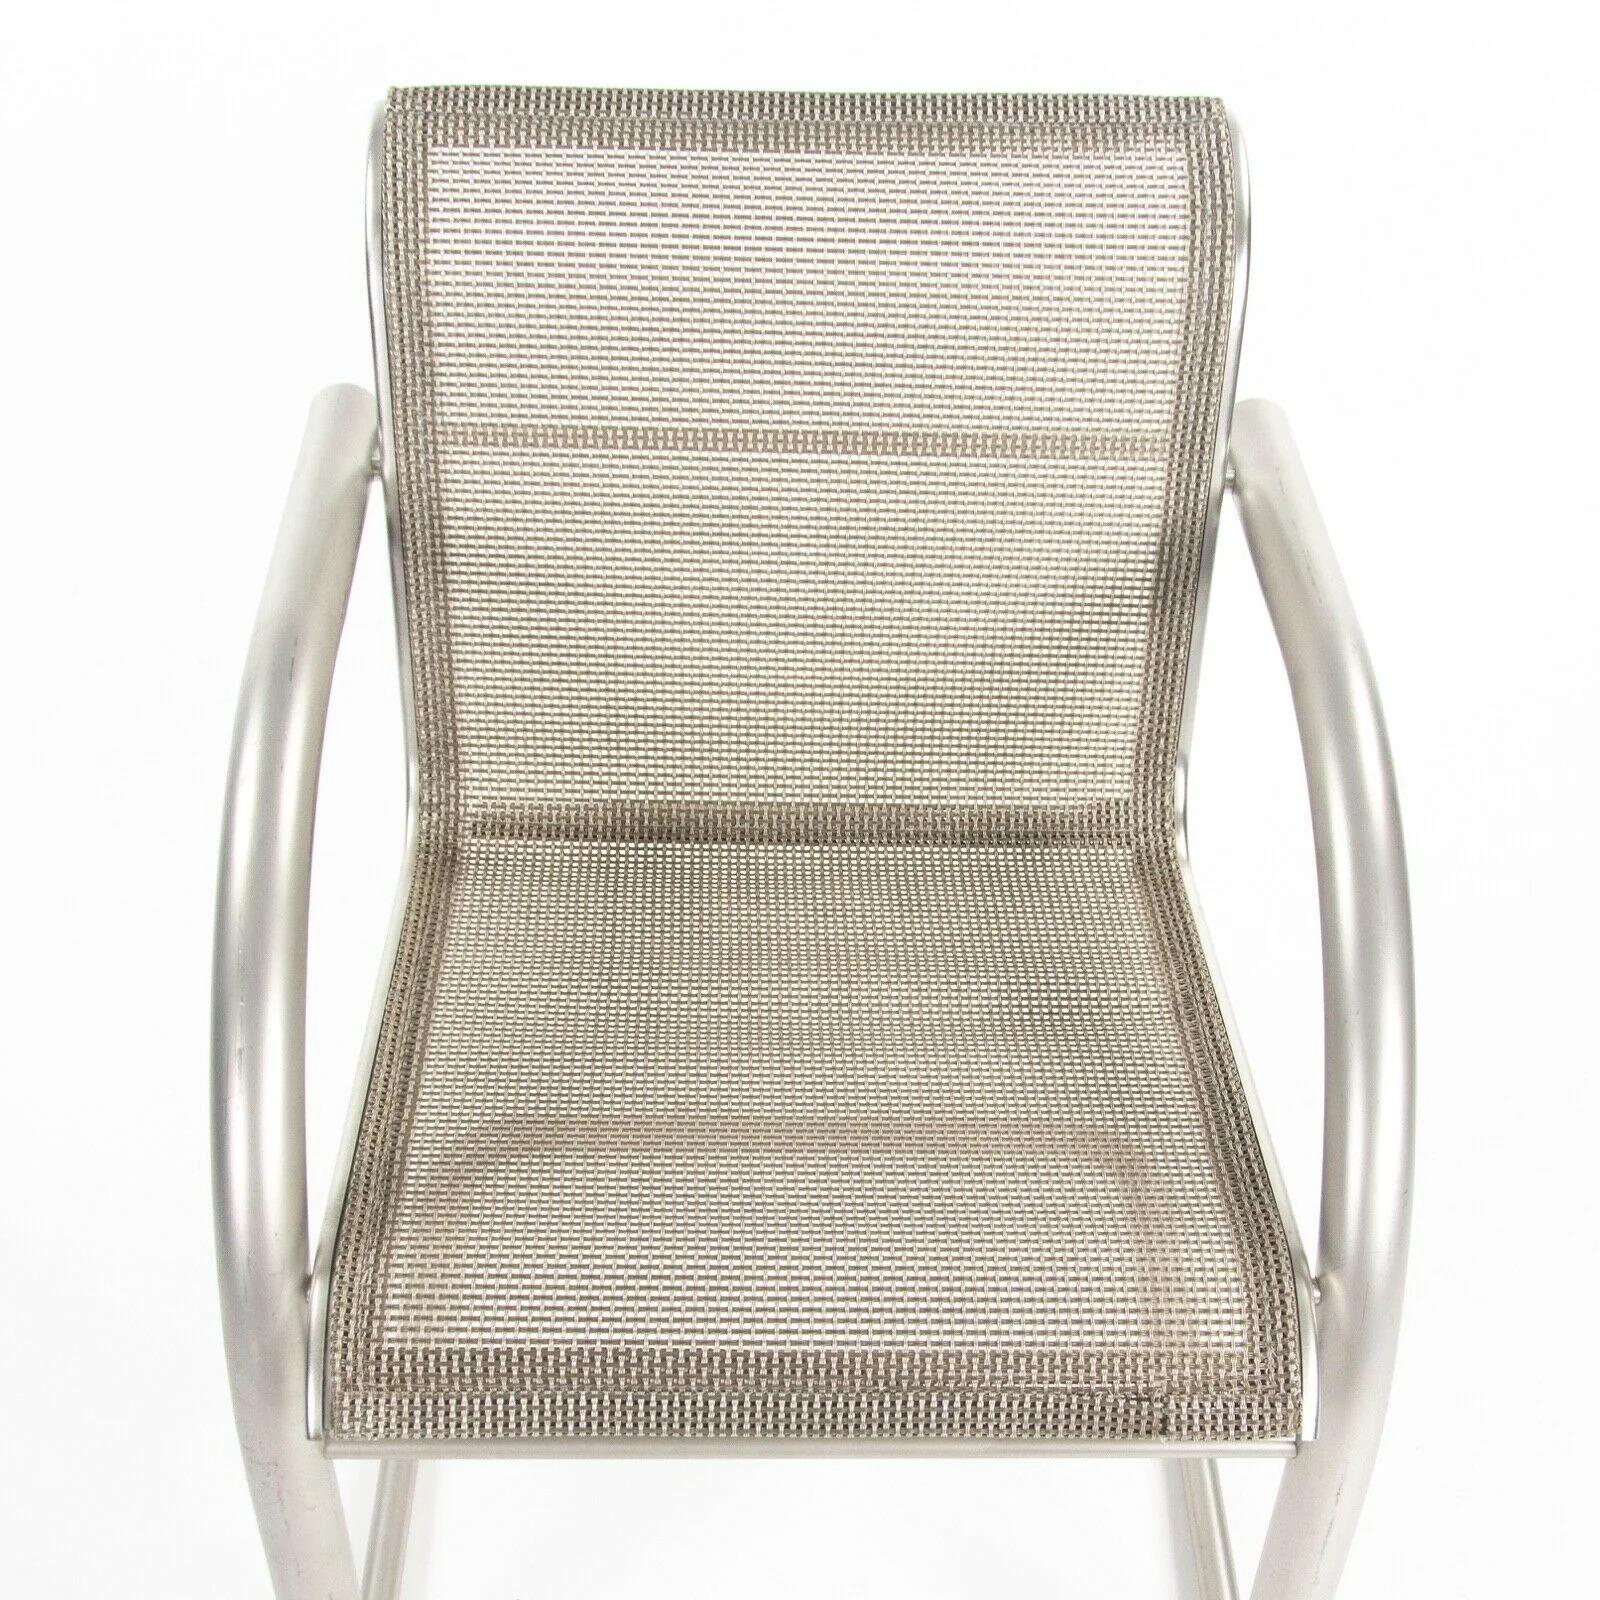 2001 Prototype Richard Schultz 2002 Collection Mesh Cantilever Dining Chair For Sale 3